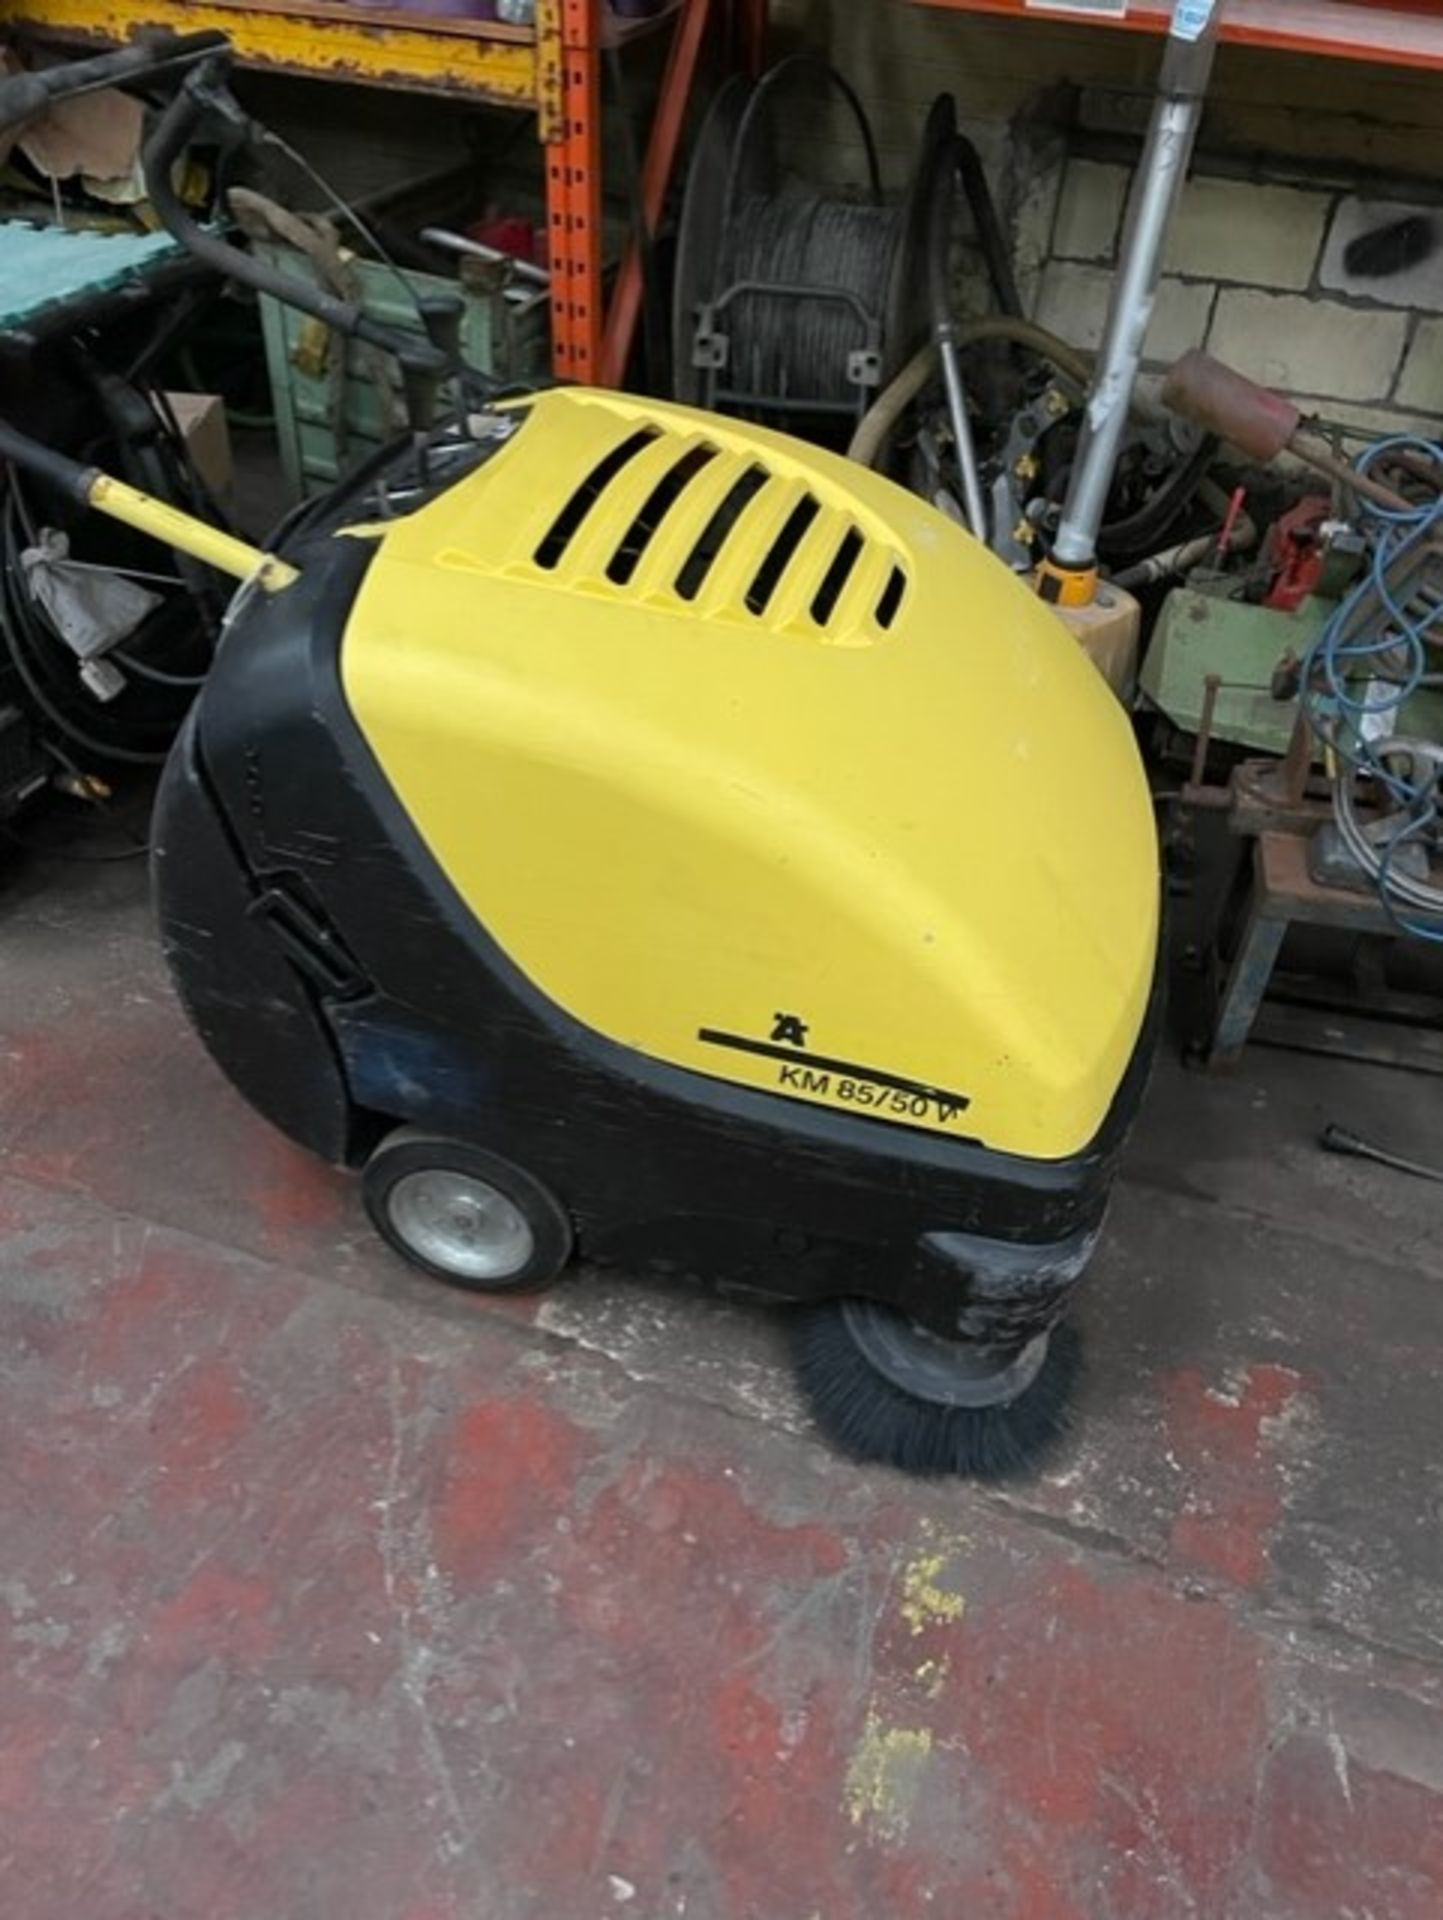 Looking tidy a karcher floor sweeper has a gx 160 engine on it  quite a bulky thing - Bild 2 aus 5